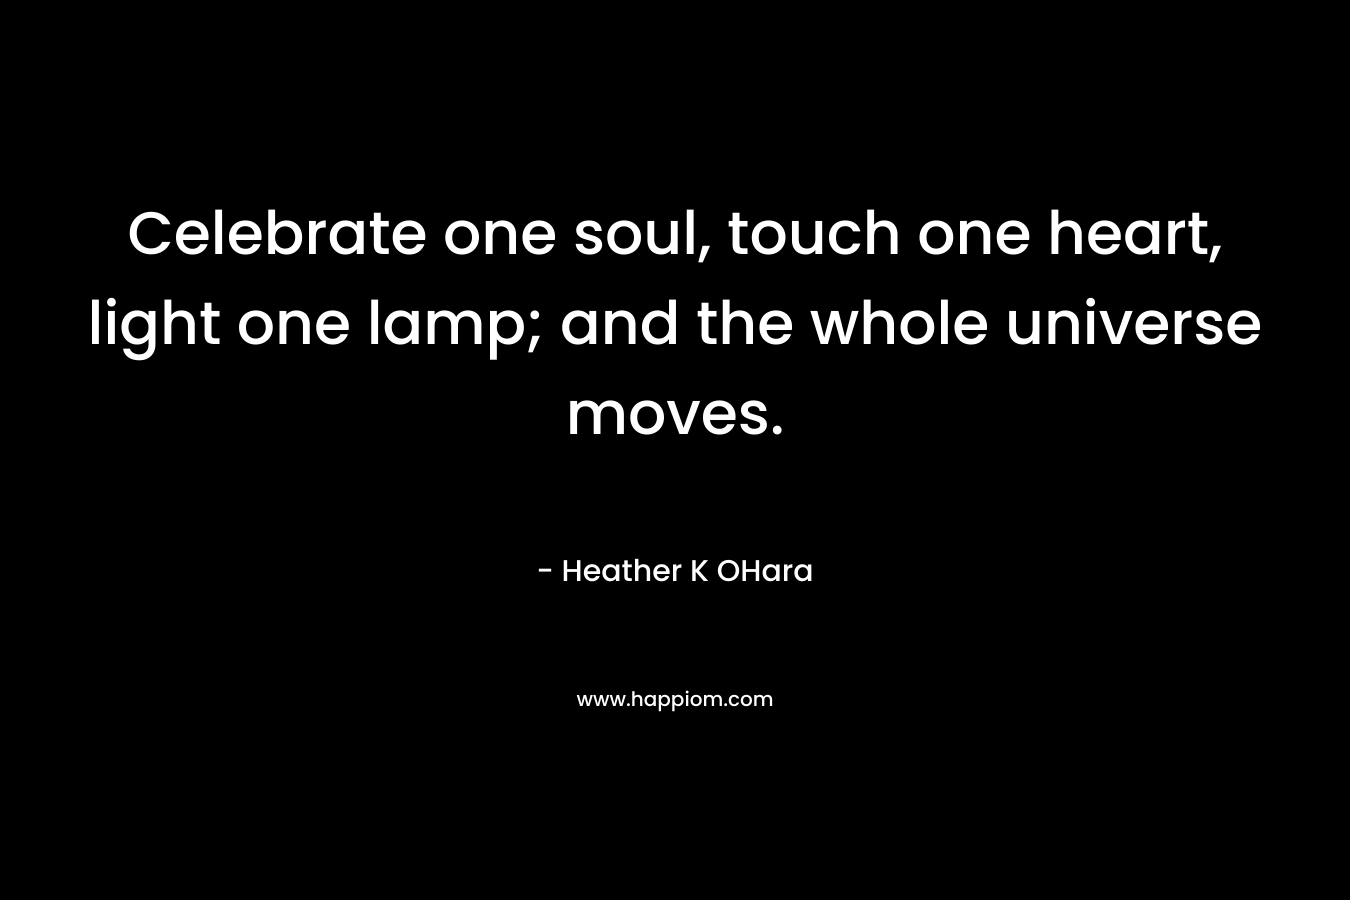 Celebrate one soul, touch one heart, light one lamp; and the whole universe moves. – Heather K OHara